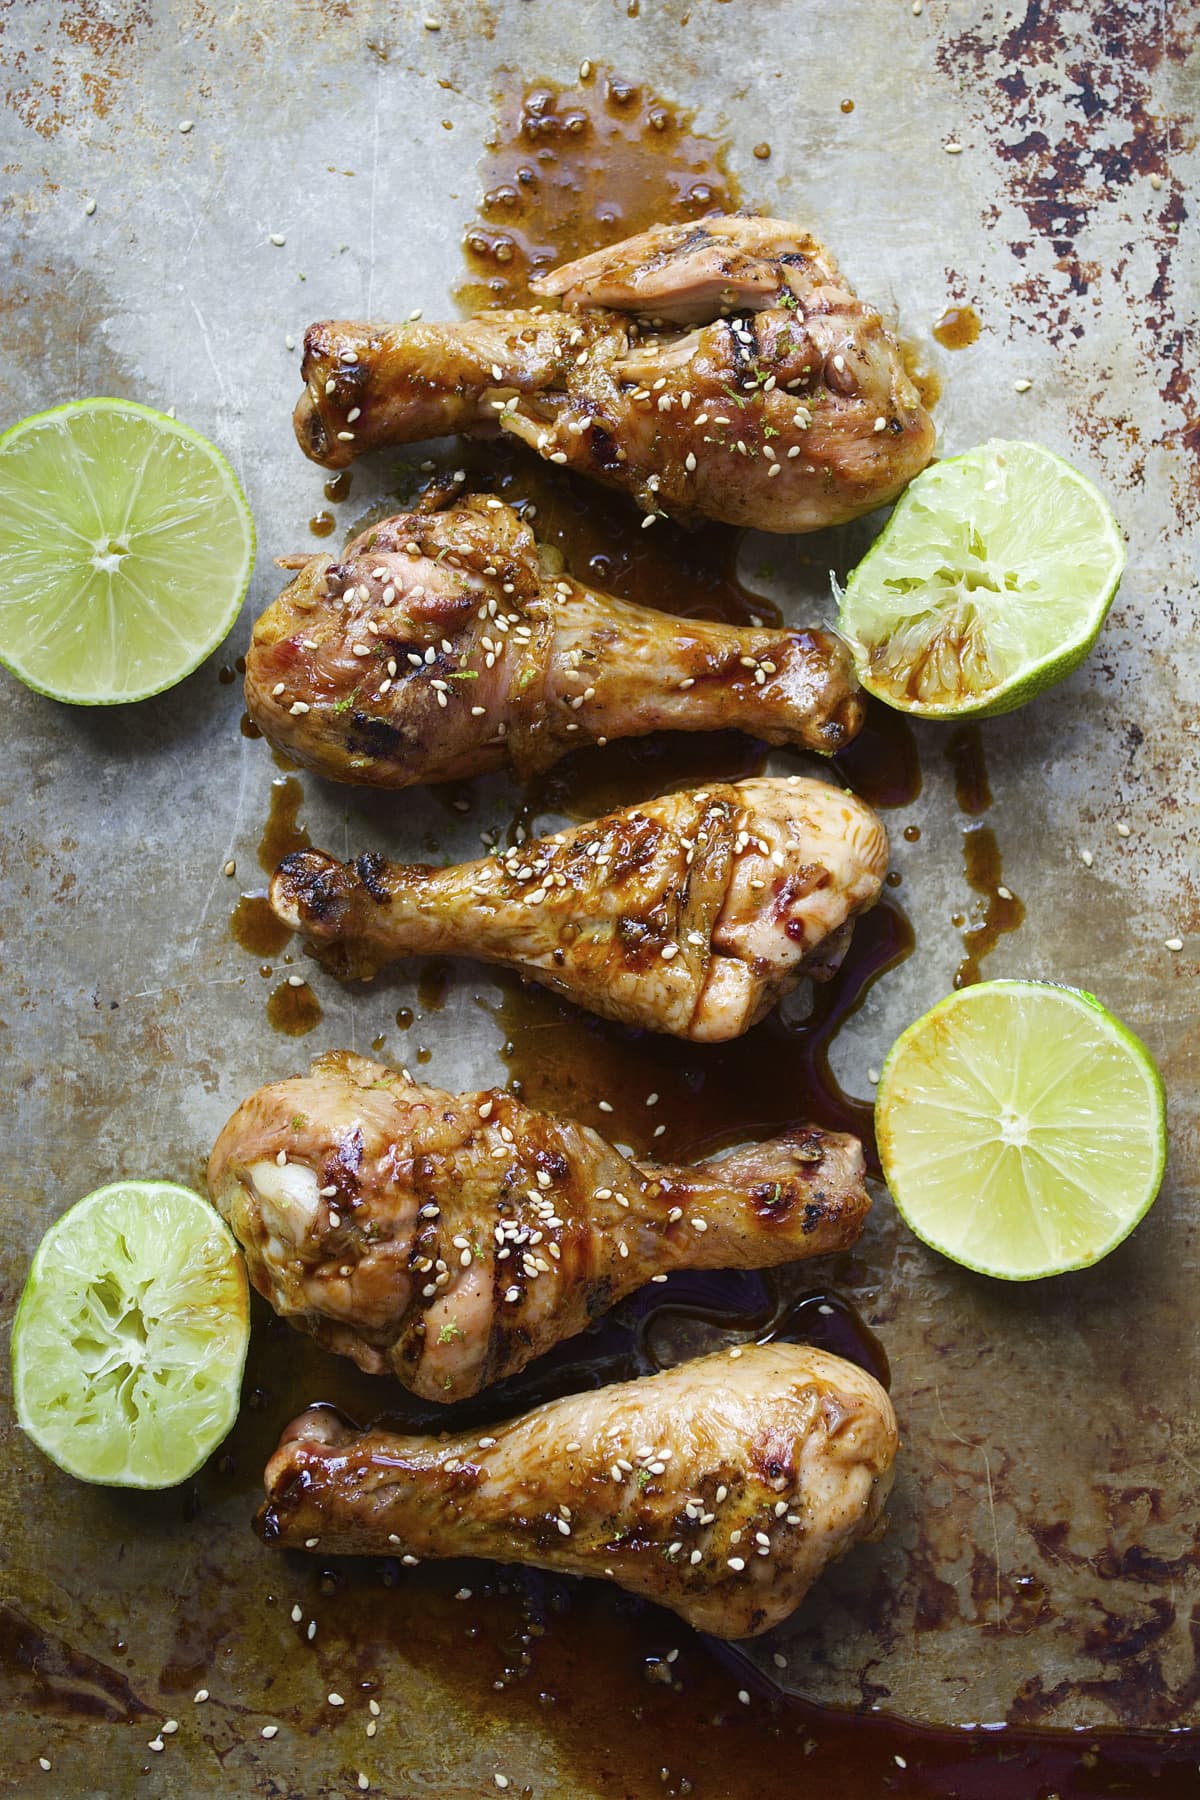 Smoked Drumsticks with Sriracha Honey Lime Sauce are loaded with flavor! These drumsticks are ready in under 30 minutes and totally gluten free!